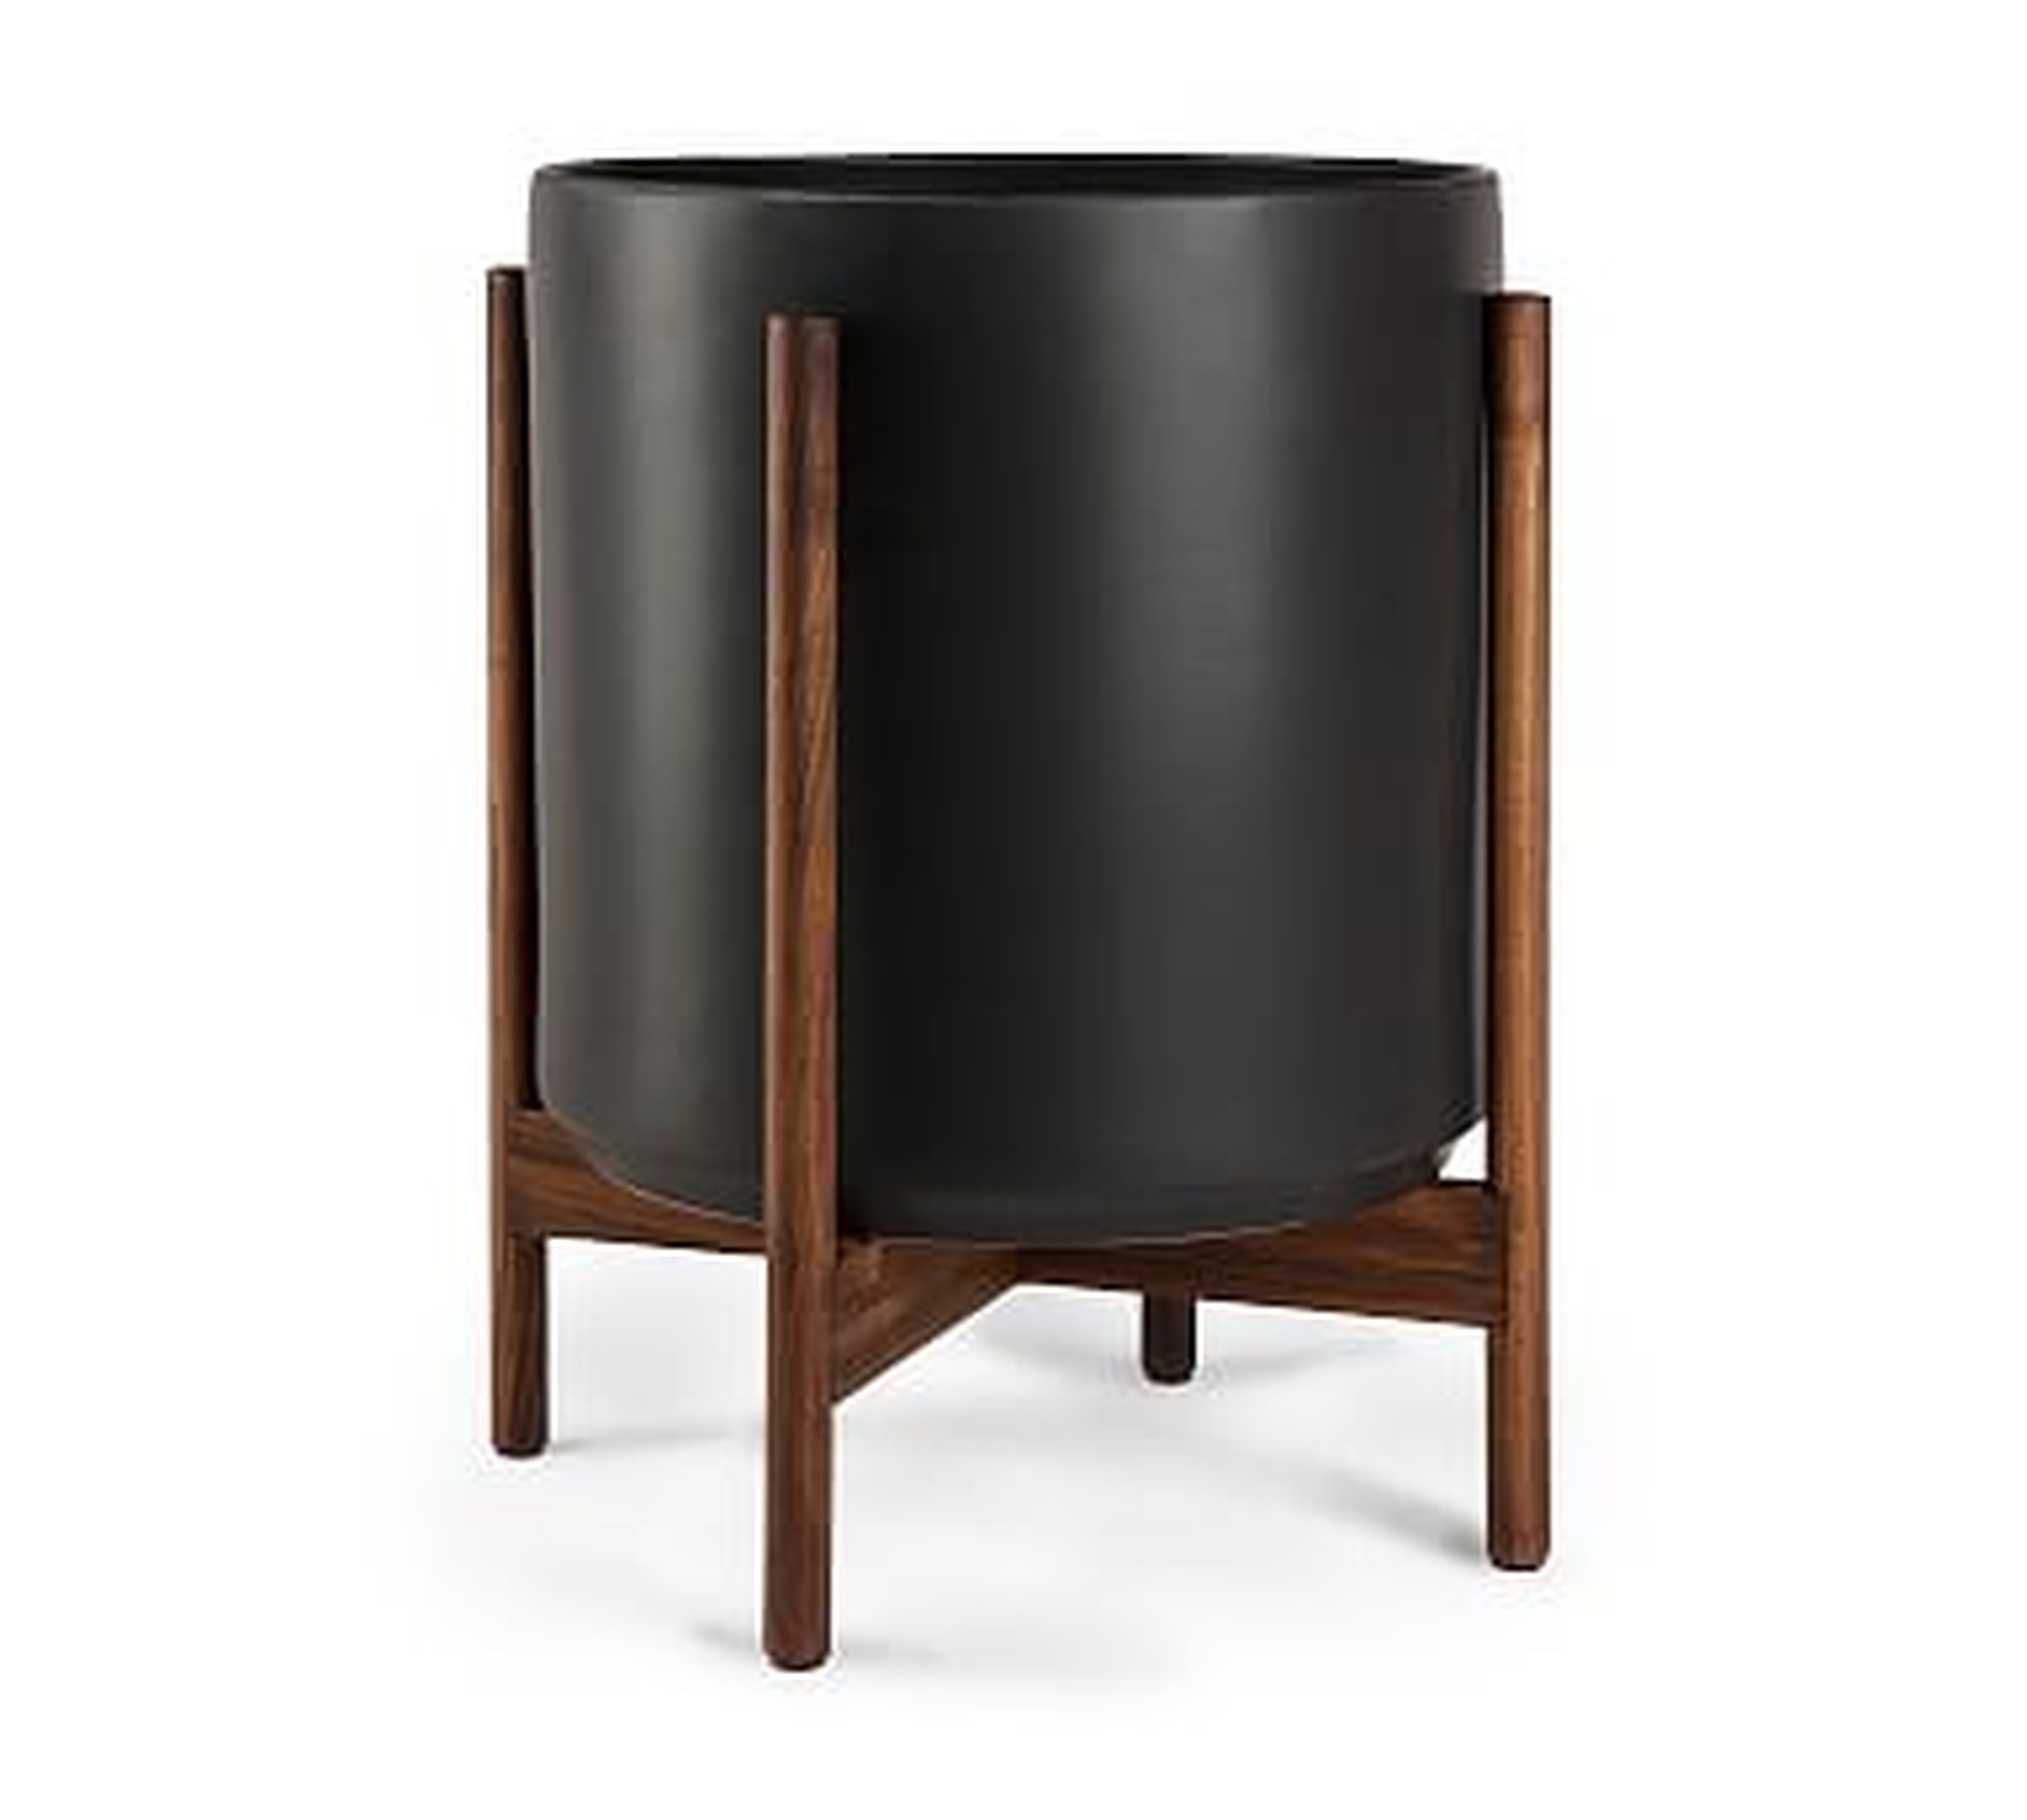 Modern Ceramic Planters with Wooden Stand, Black - Large - Pottery Barn